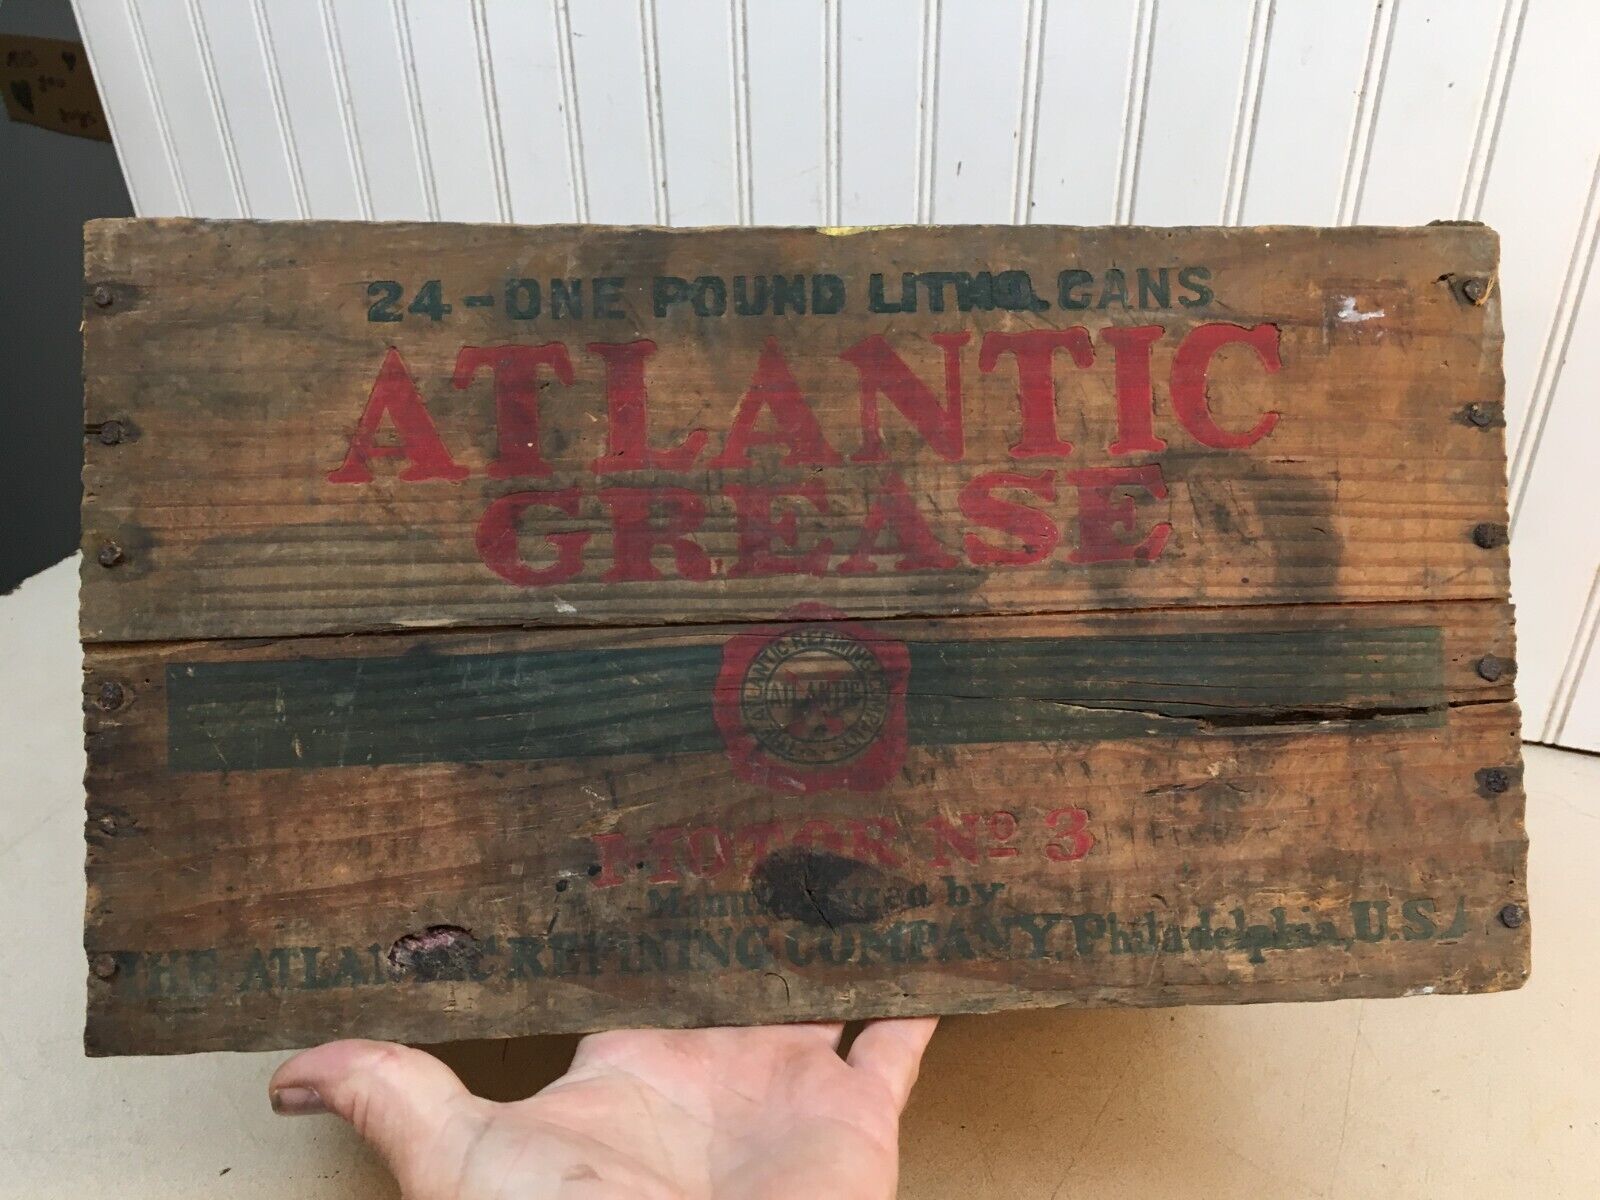 1930s Vintage Atlantic Refining Grease Wood Crate 24 One Pound Cans